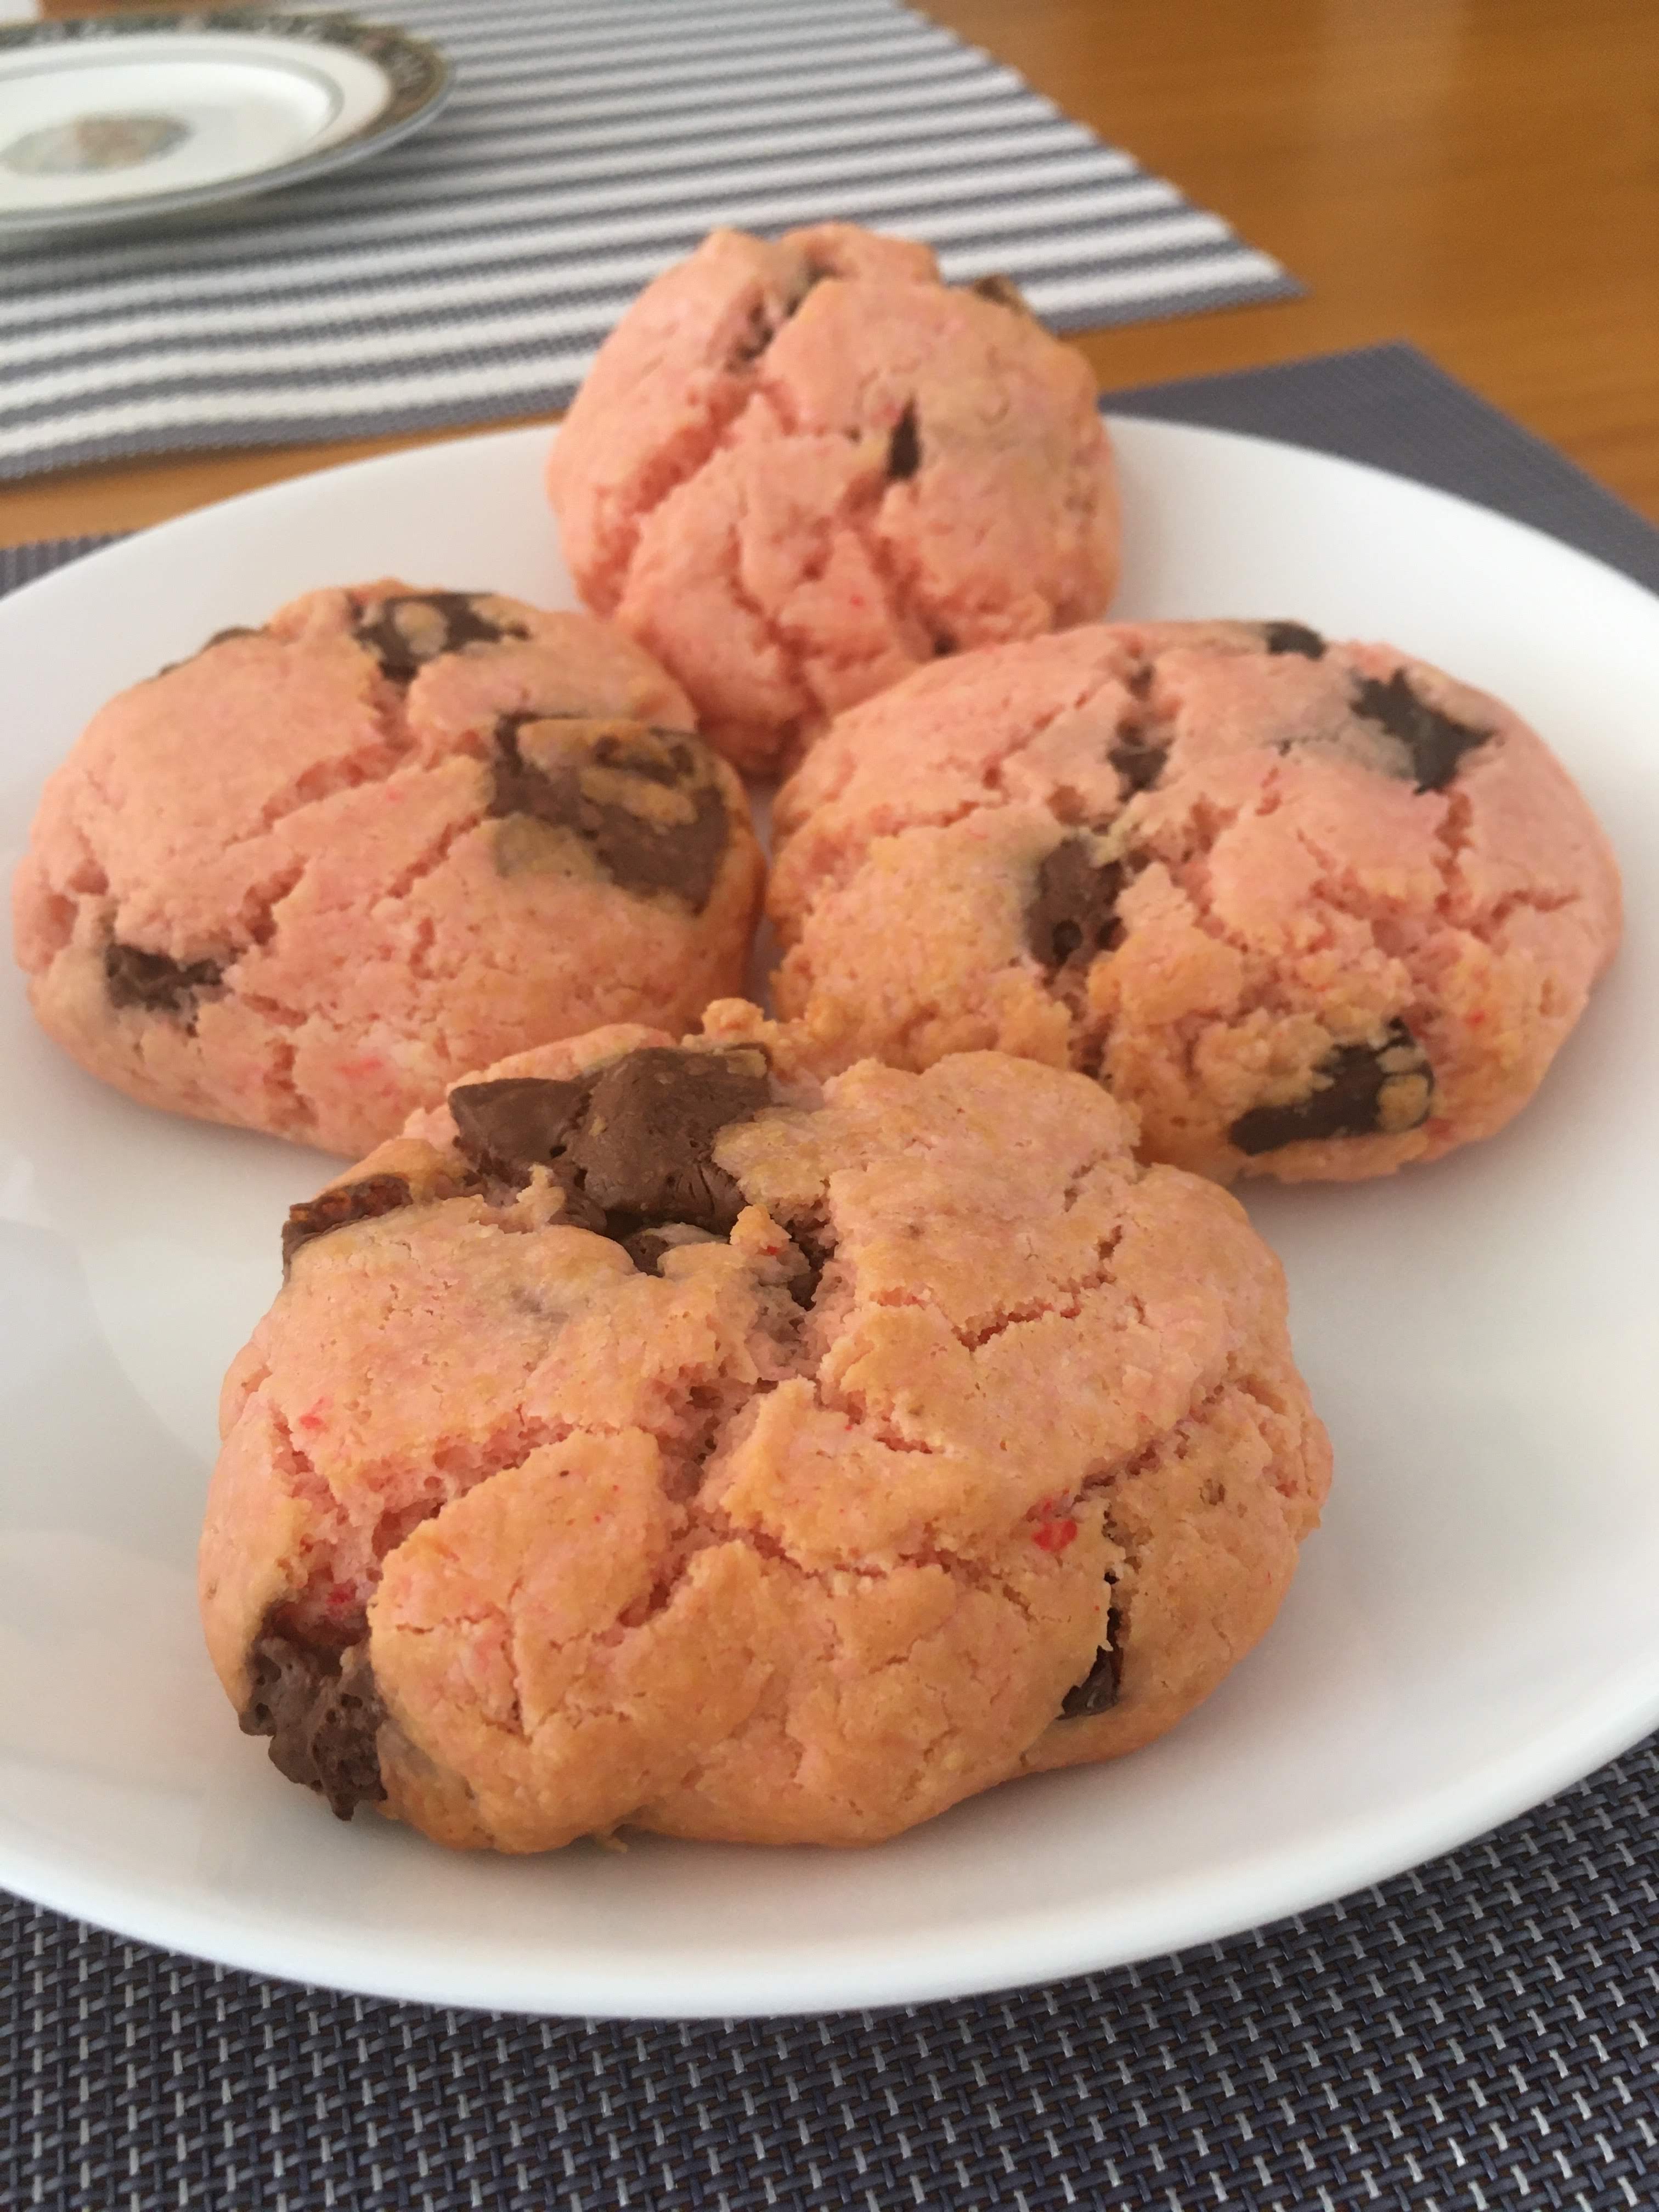 pink biscuits with chocolate chips